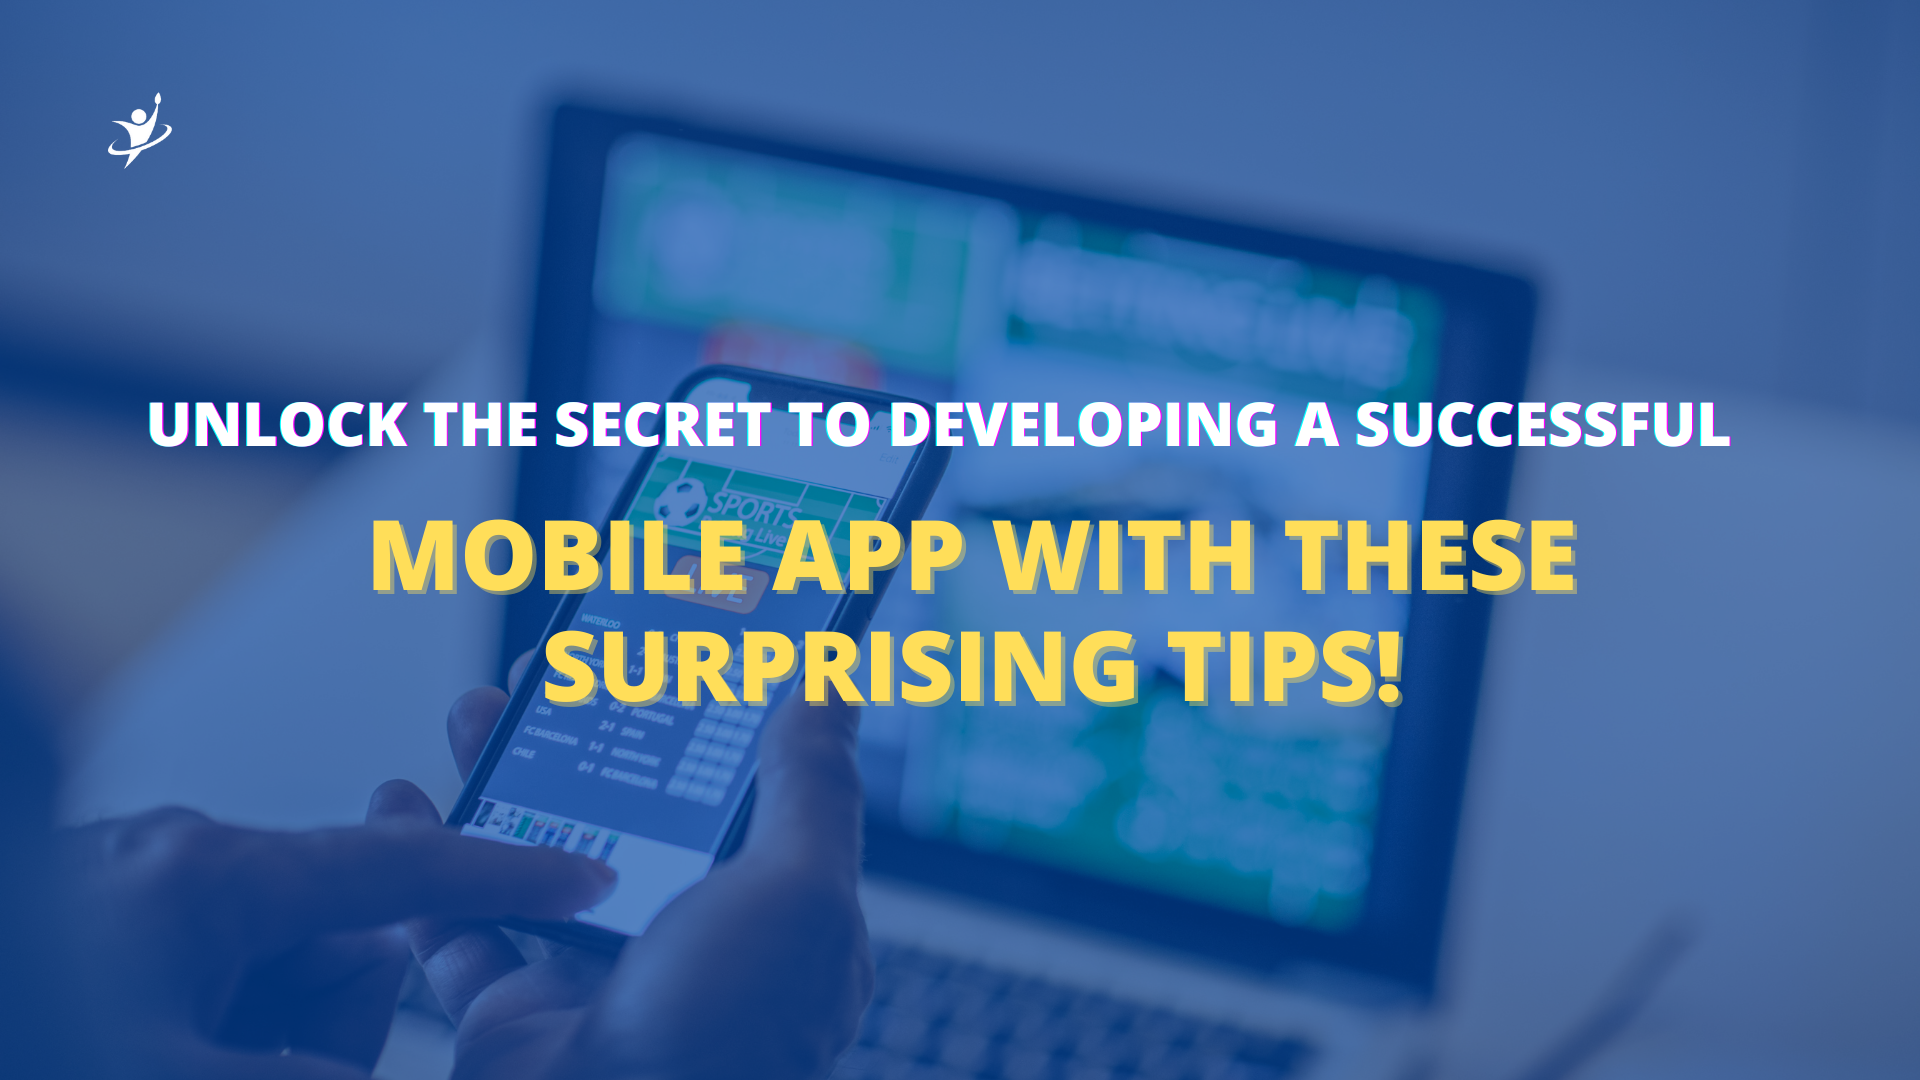 Unlock the Secret to Developing a Successful Mobile App with These Surprising Tips!